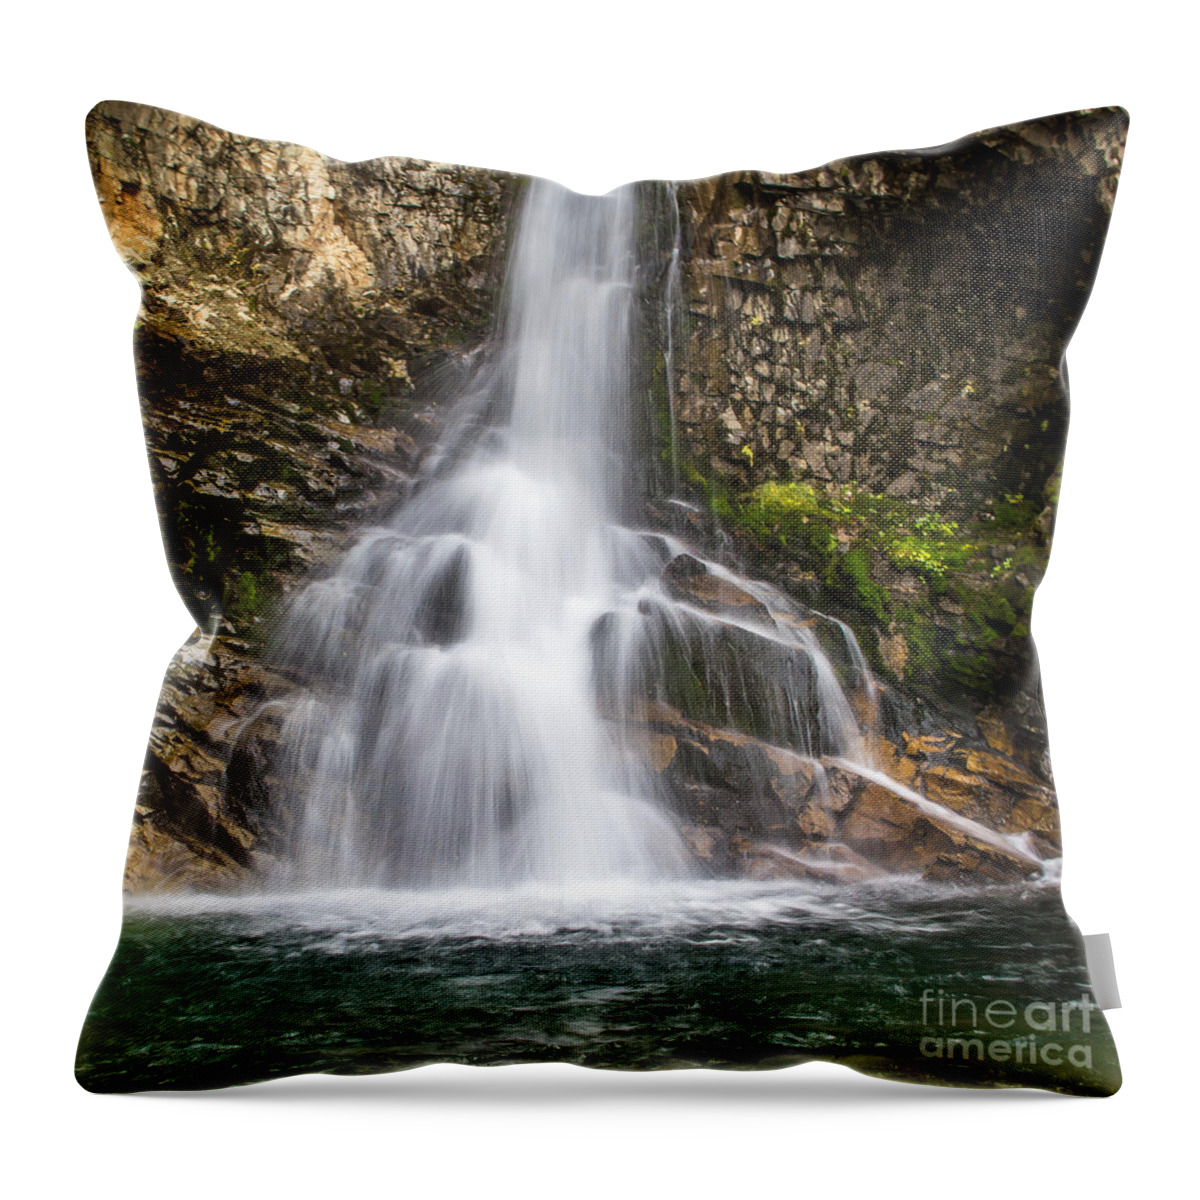 Waterfalls Throw Pillow featuring the photograph Whitmore Falls by Jim McCain